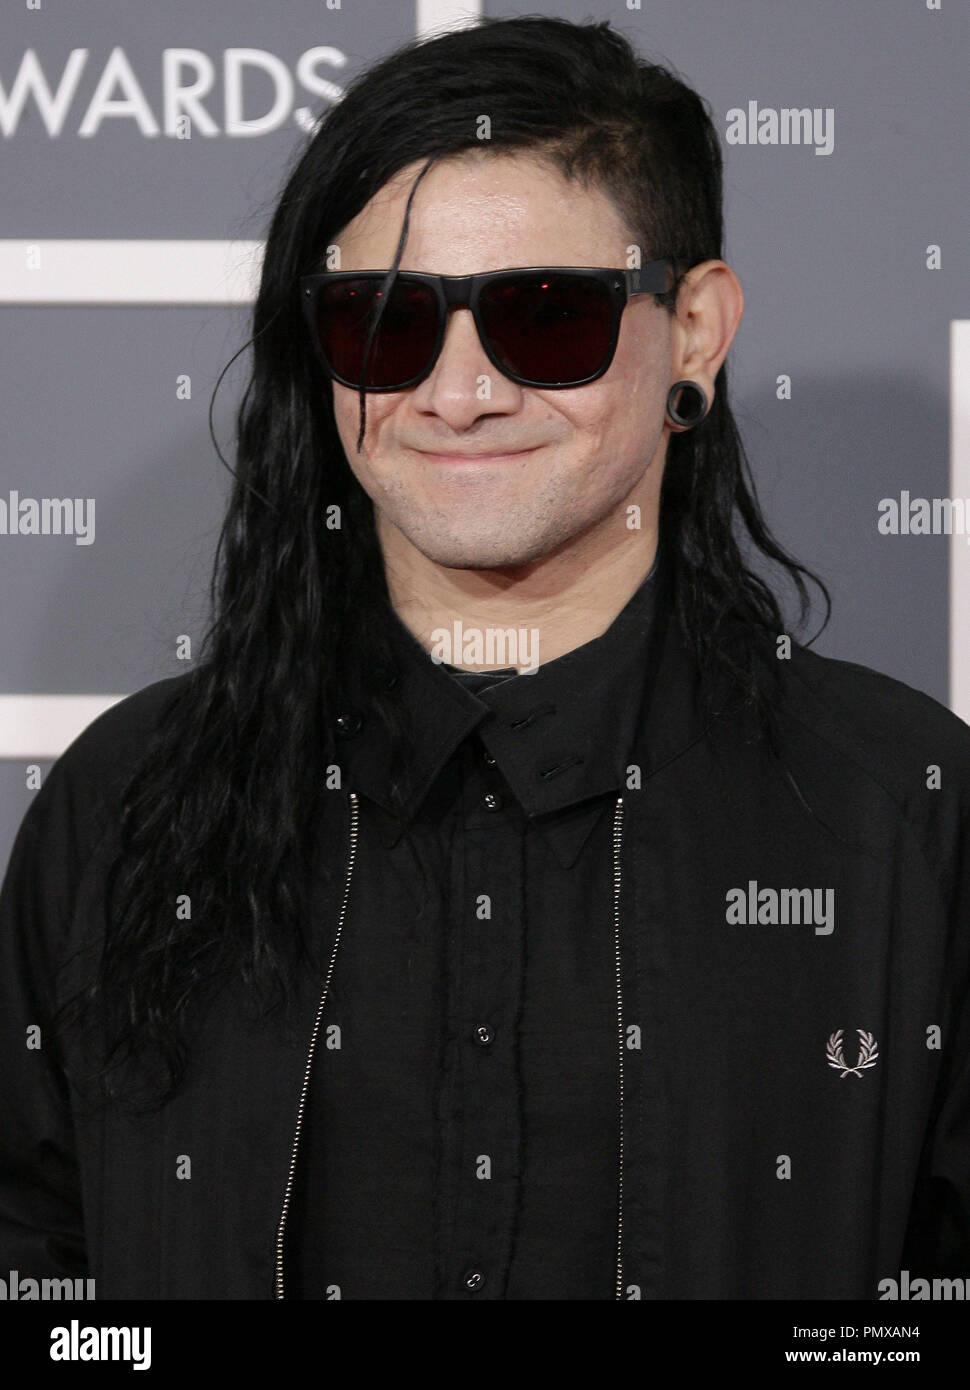 Skrillex at the 55th Annual Grammy Awards held at the Staples Center in Los Angeles, CA.The event took place on Sunday, February 10, 2013. Photo by PRPP / PictureLux  File Reference # 31836 158PRPP  For Editorial Use Only -  All Rights Reserved Stock Photo